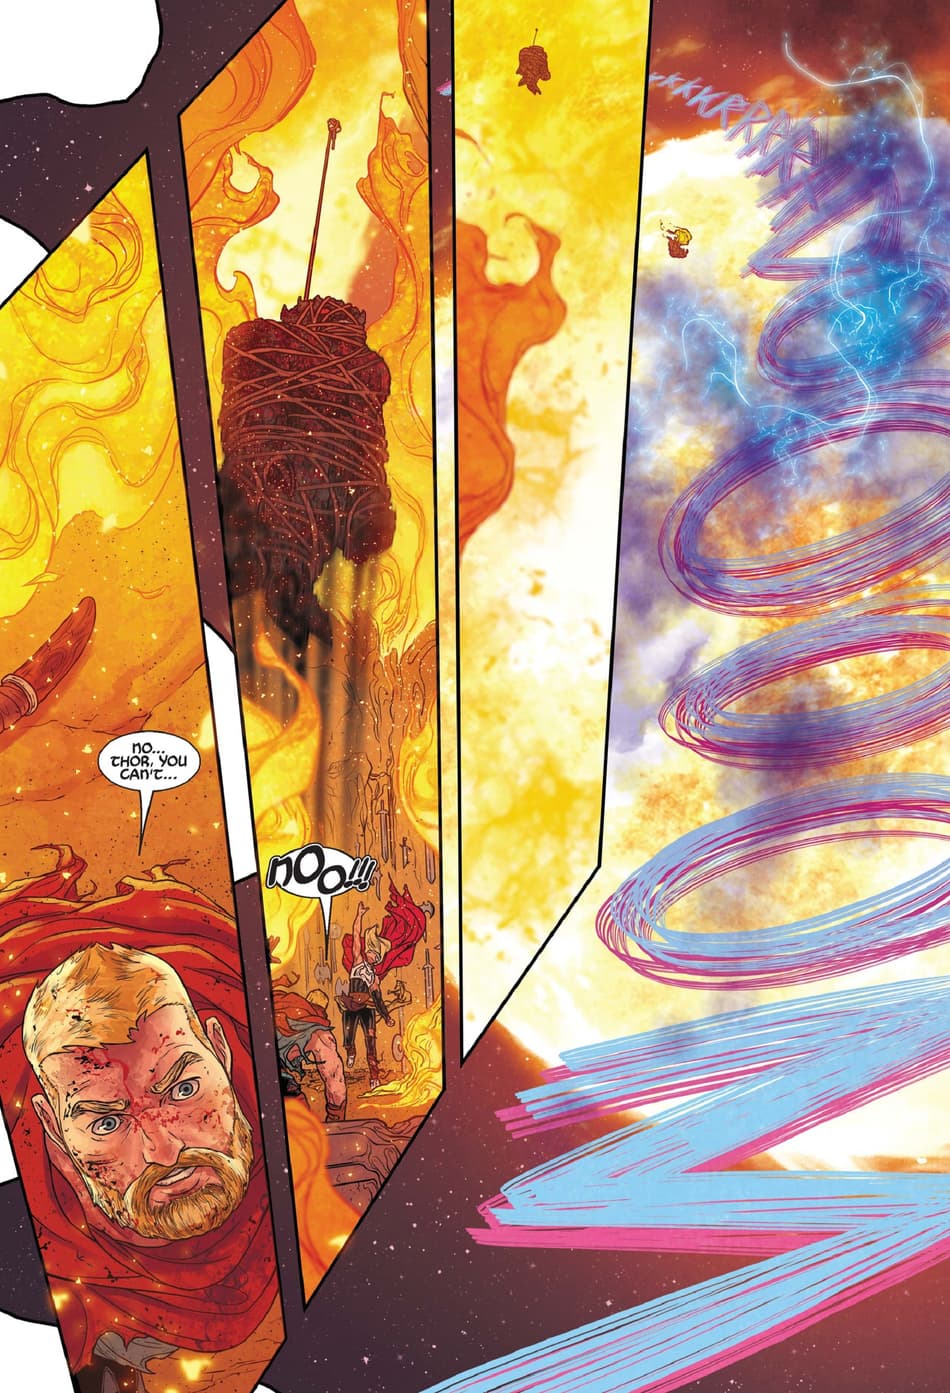 Thor throws Mjolnir and the Mangog into the sun.